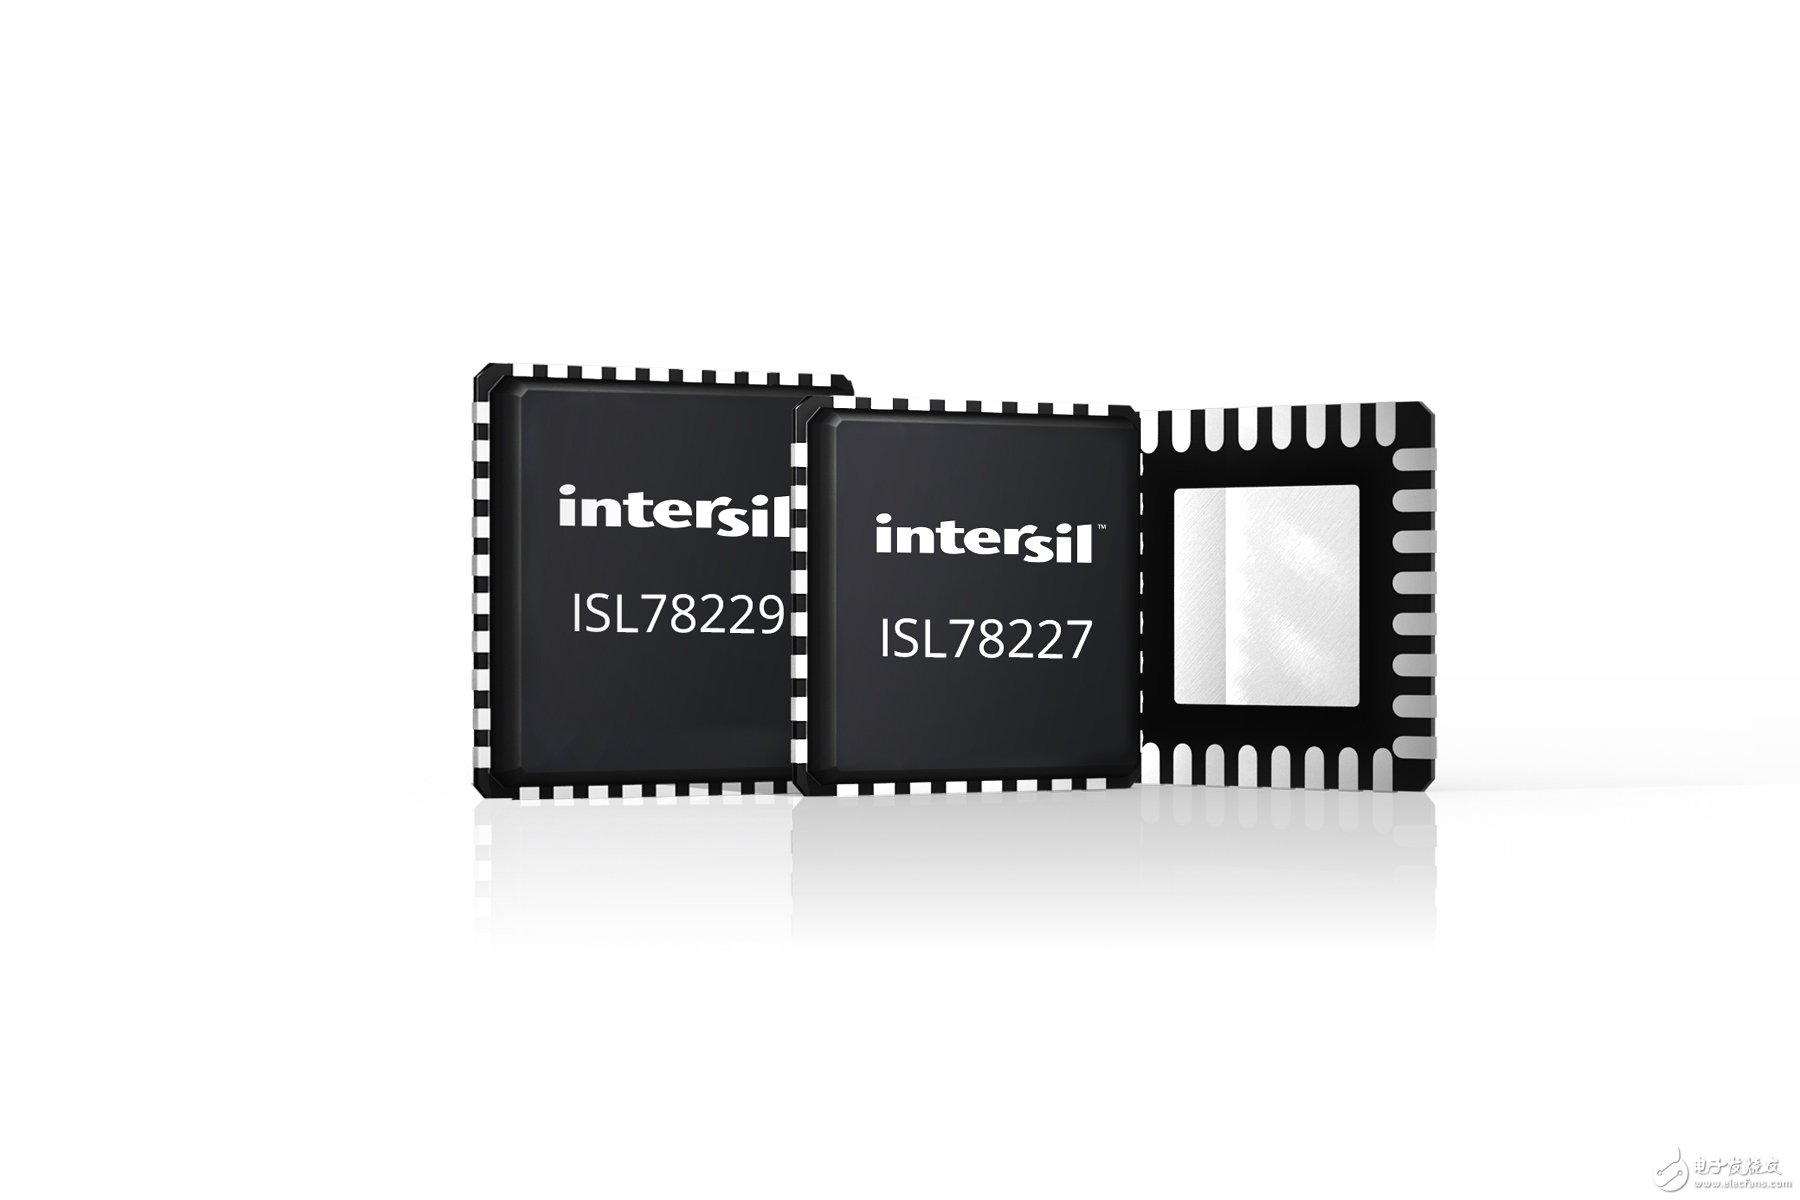 Intersil Multiphase 55V Synchronous Boost Controller Simplifies Automotive Power System Design